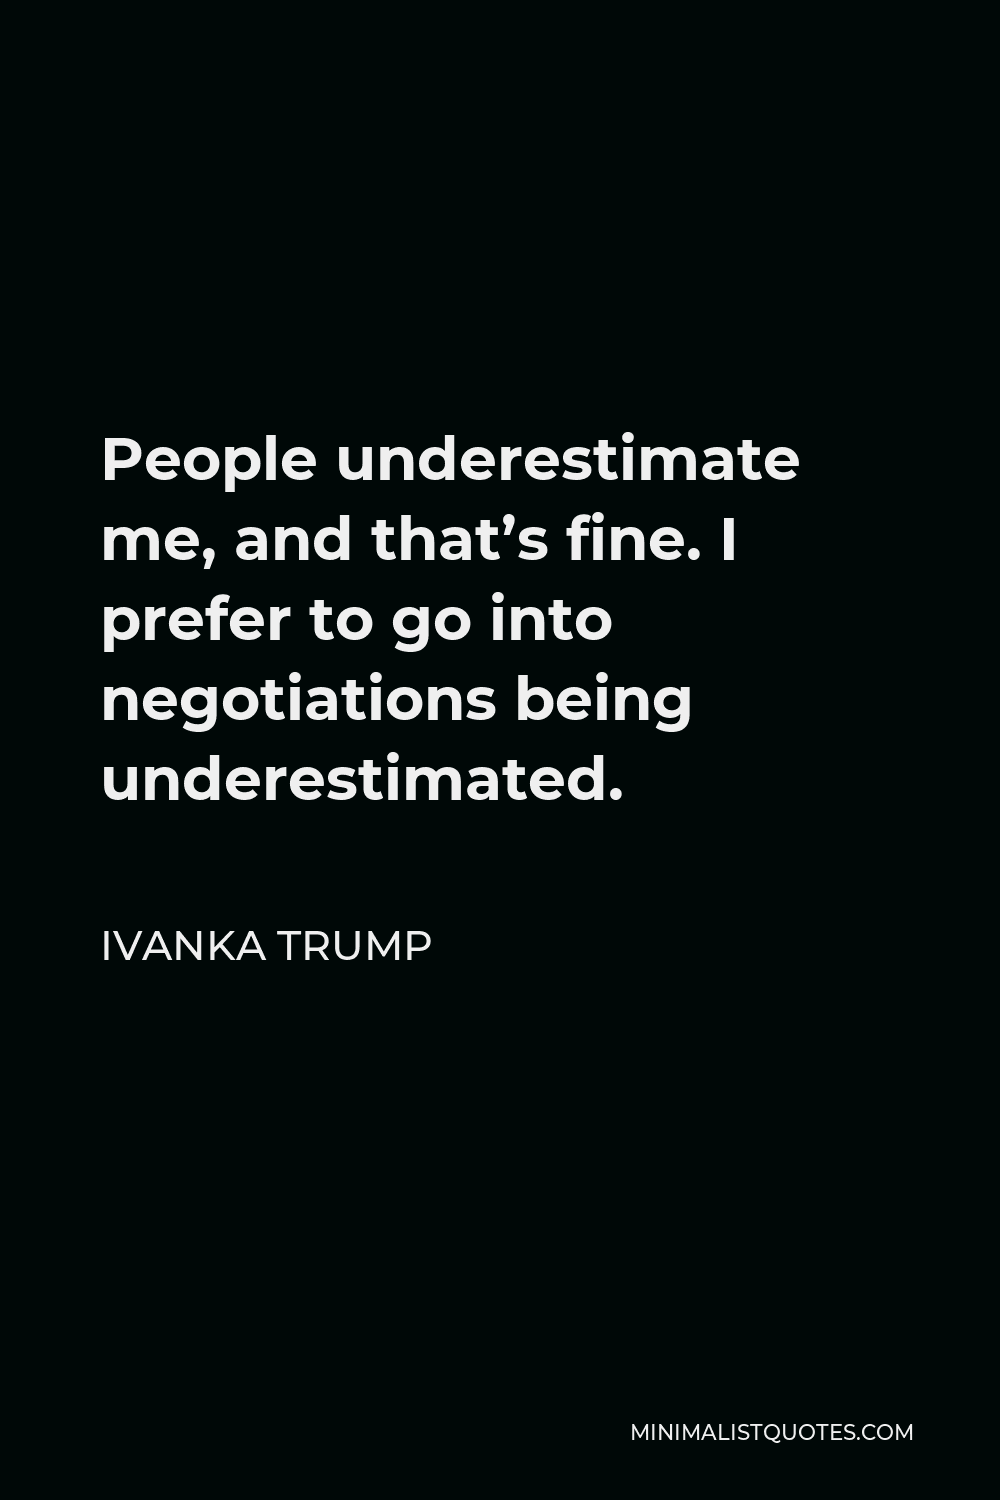 Ivanka Trump Quote - People underestimate me, and that’s fine. I prefer to go into negotiations being underestimated.